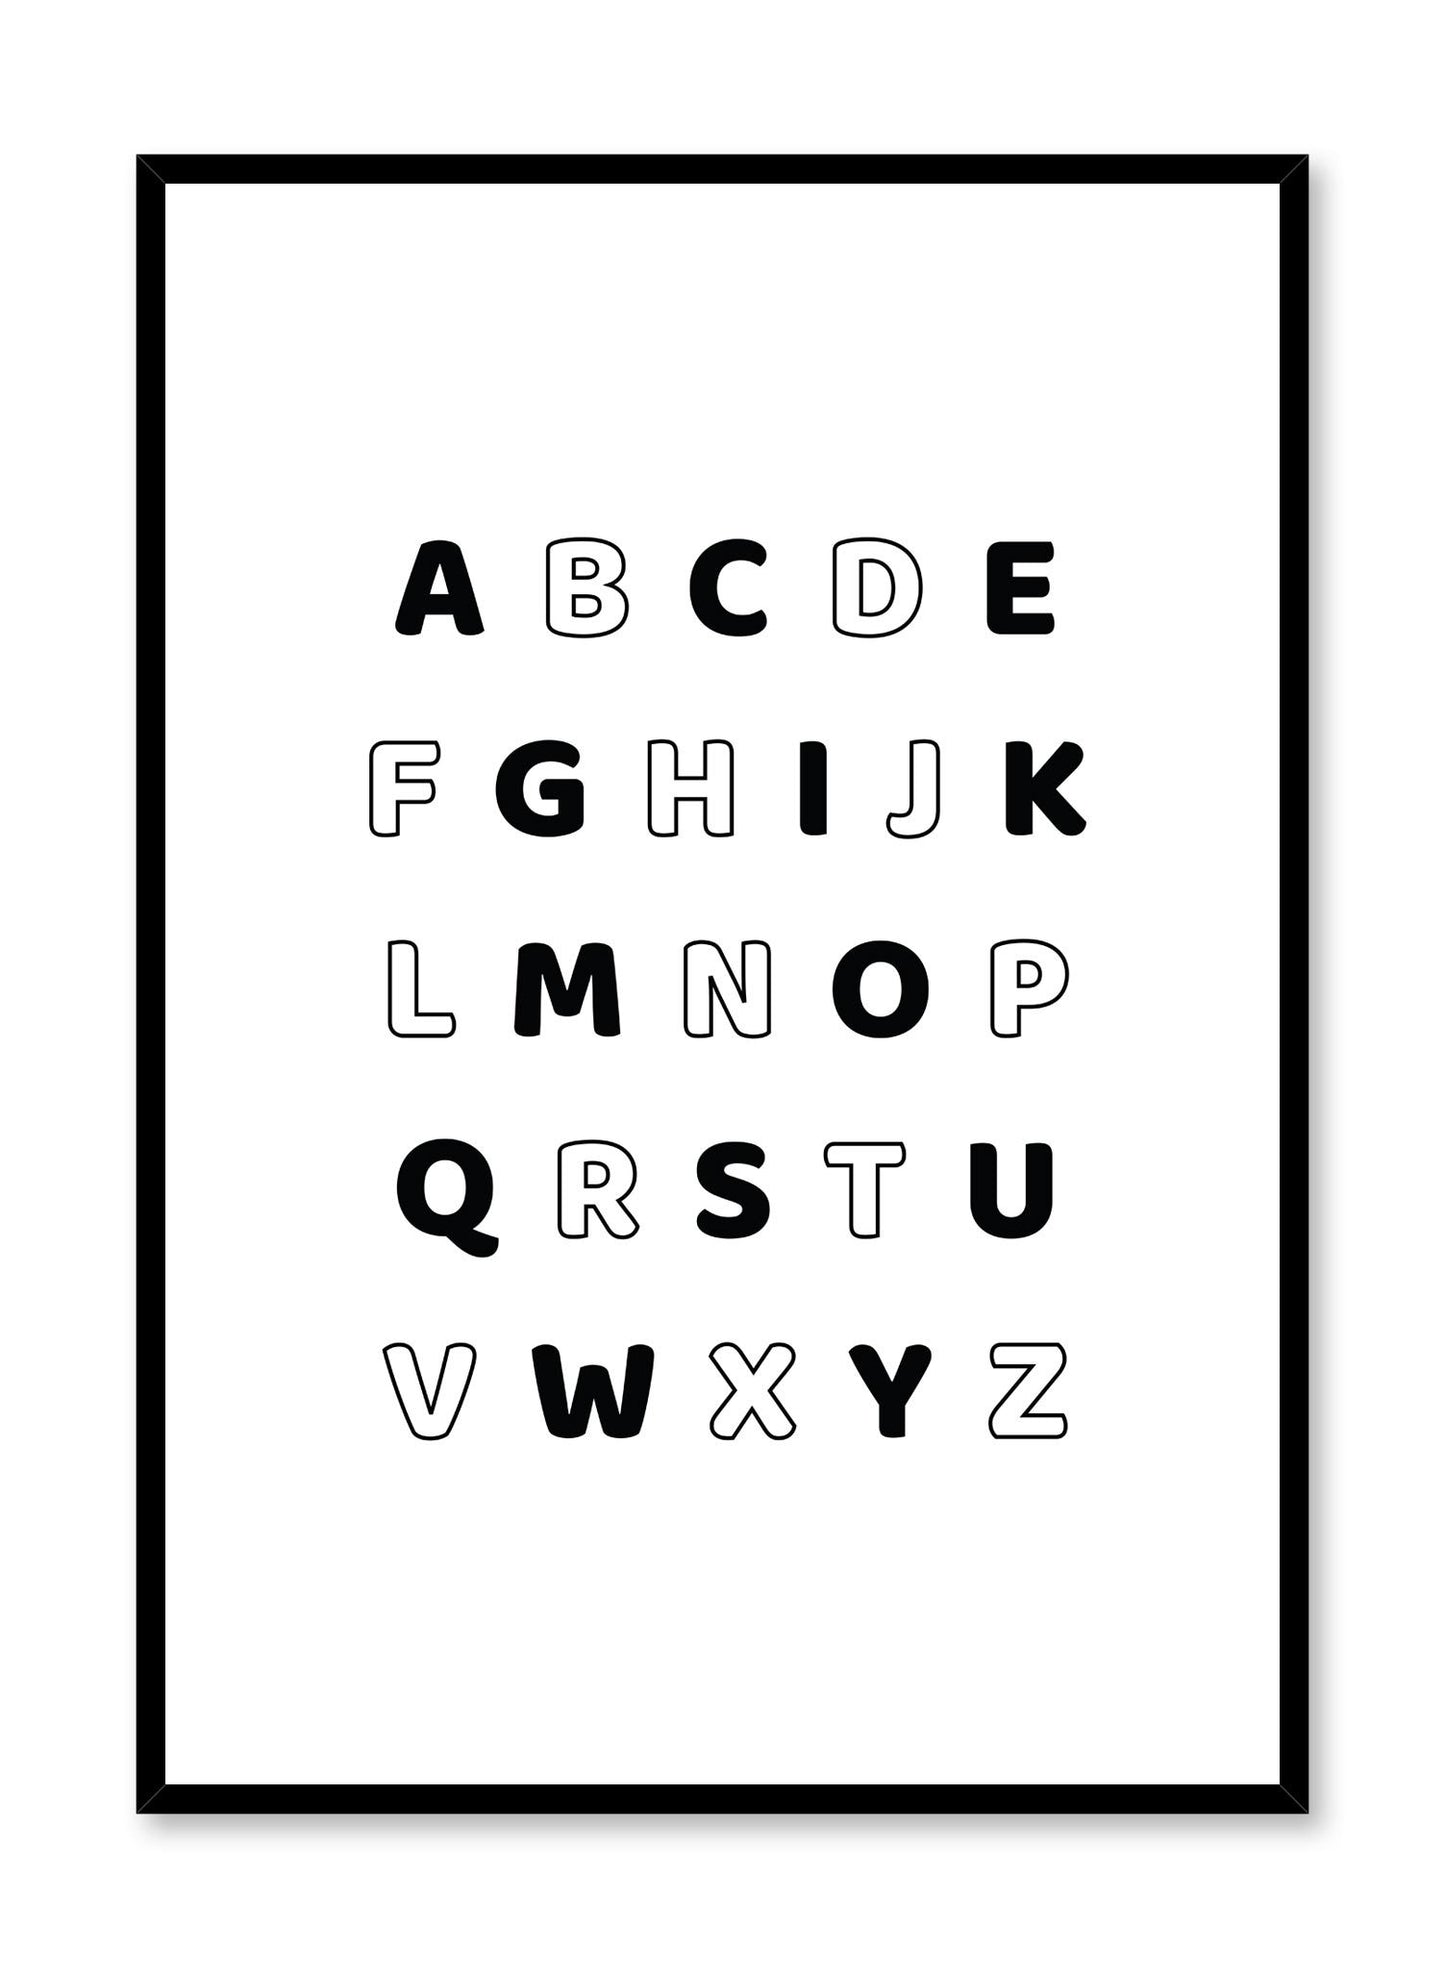 Scandinavian poster with graphic typography design of Alphabet in Black & White by Opposite Wall